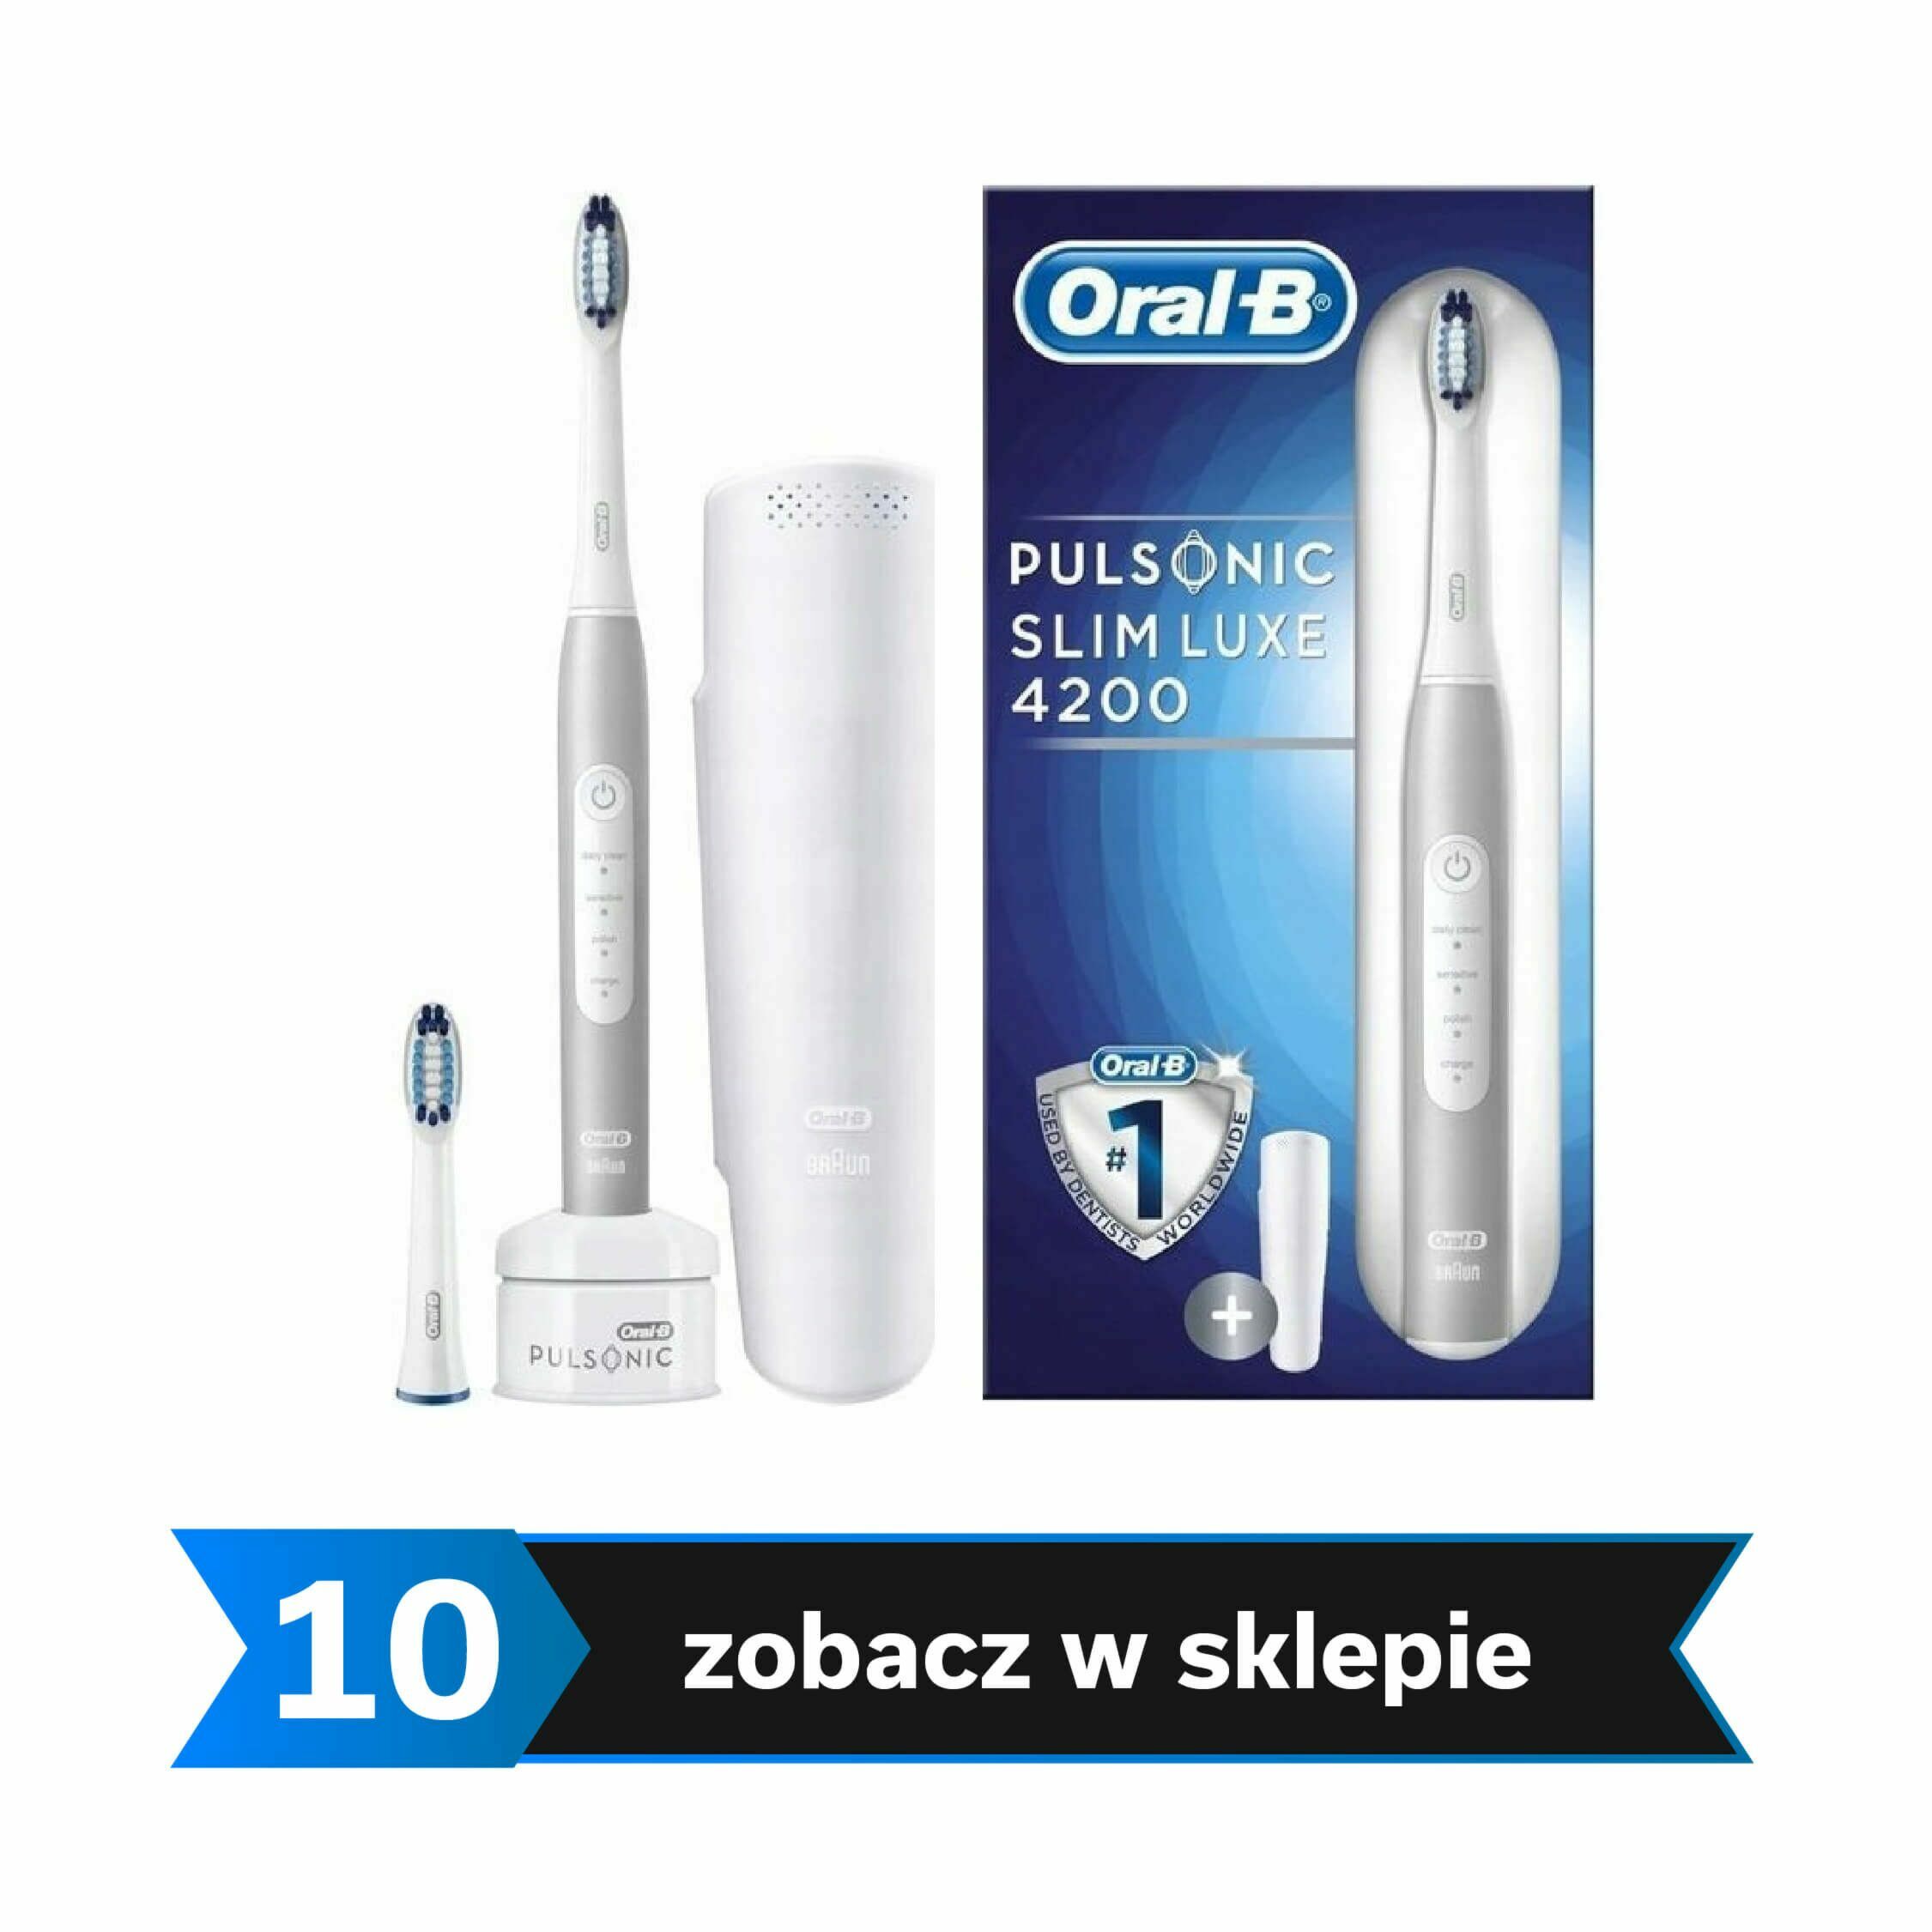 ORAL-B Pulsonic Slim Luxe 4200